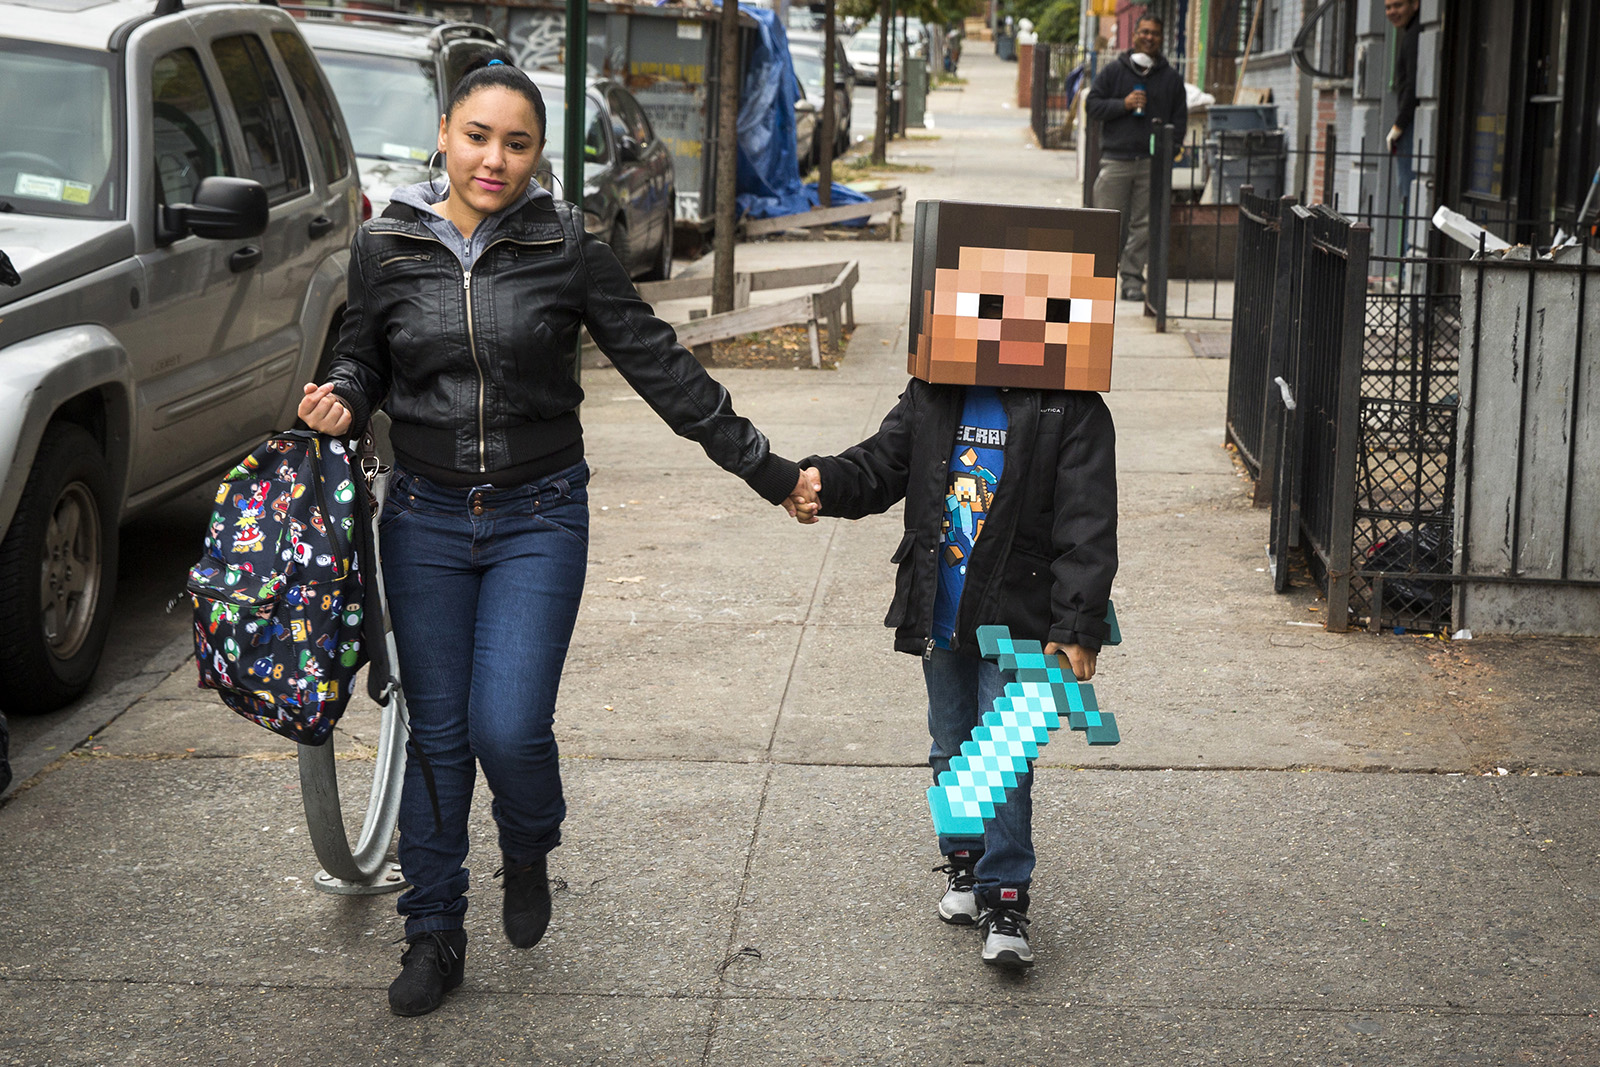 A woman walks her child to school as he is dressed as a character from Minecraft in New York on Oct. 31.